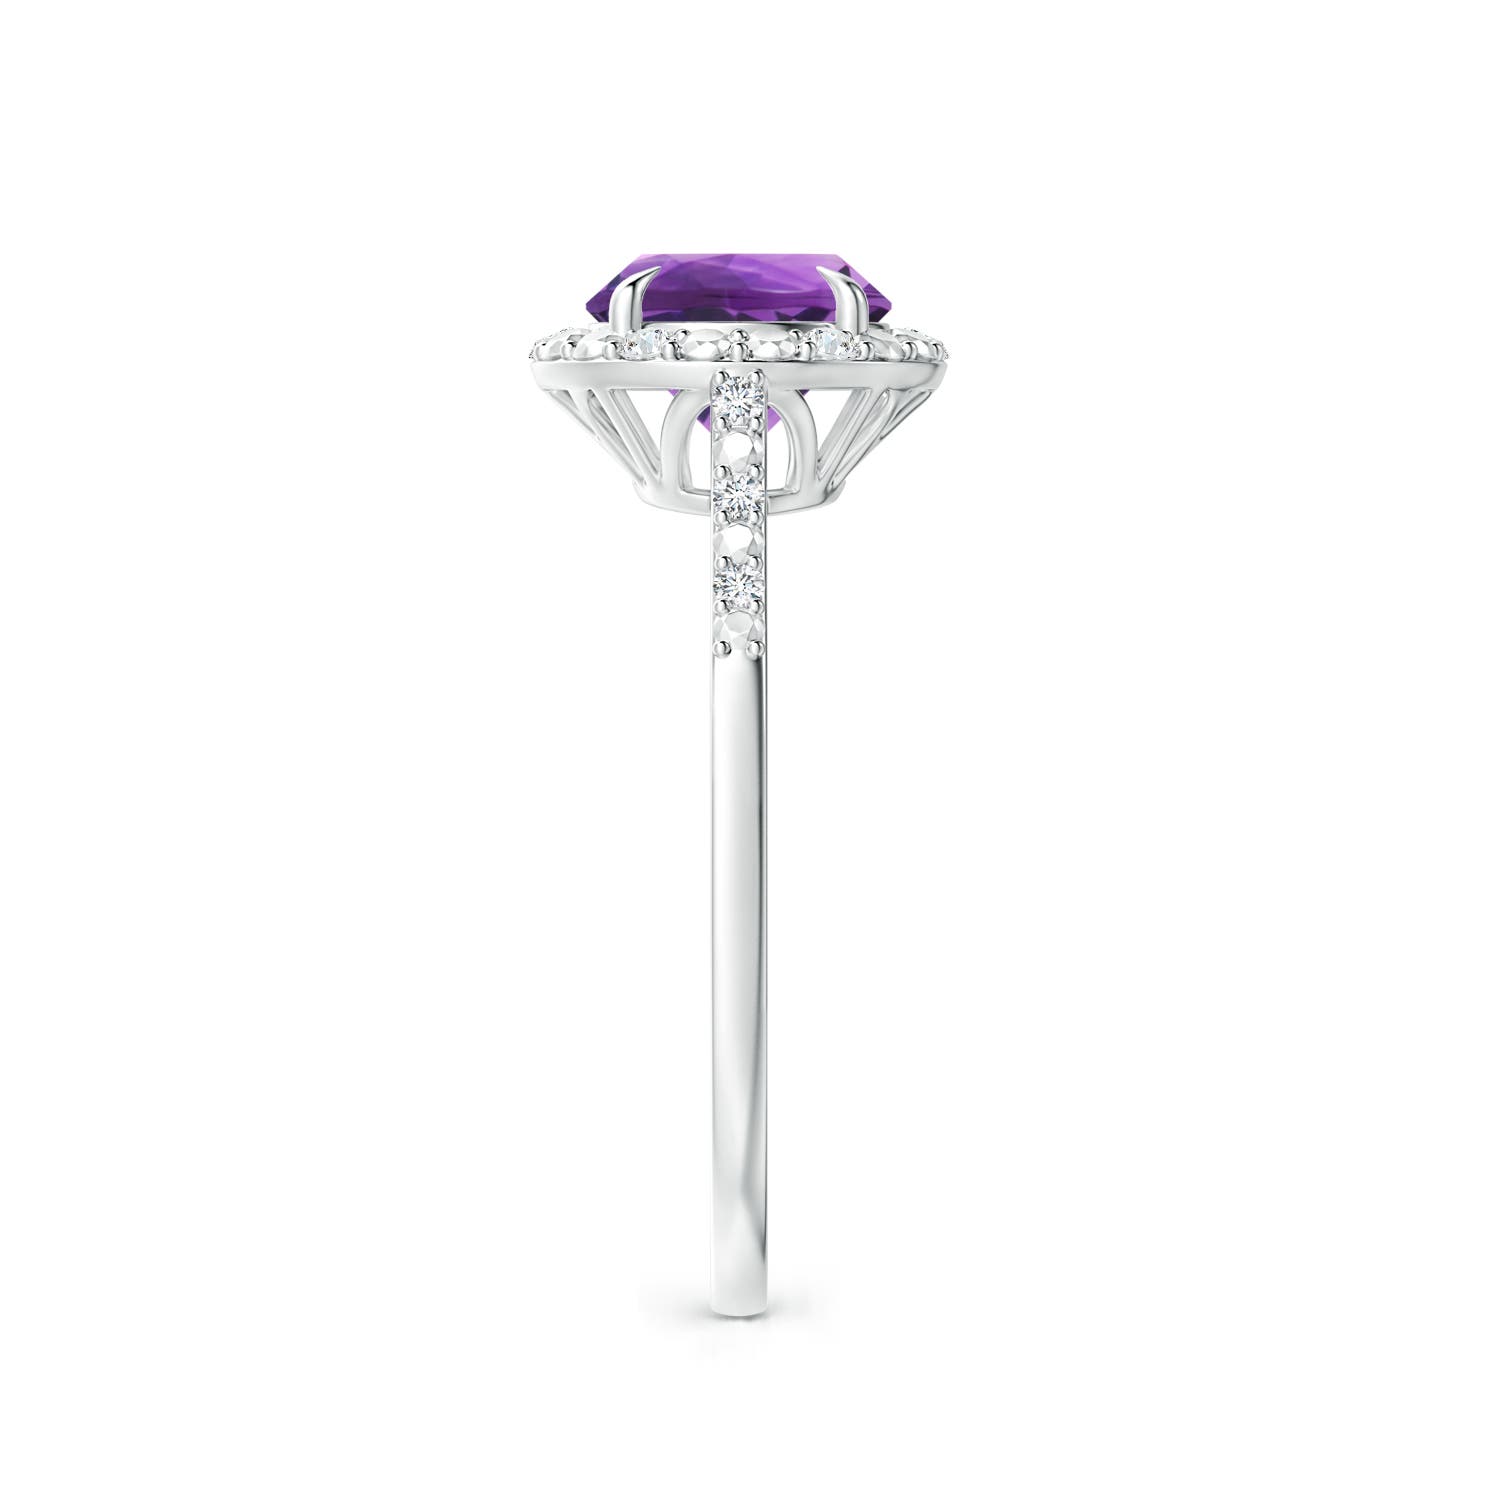 AAA - Amethyst / 1.23 CT / 14 KT White Gold